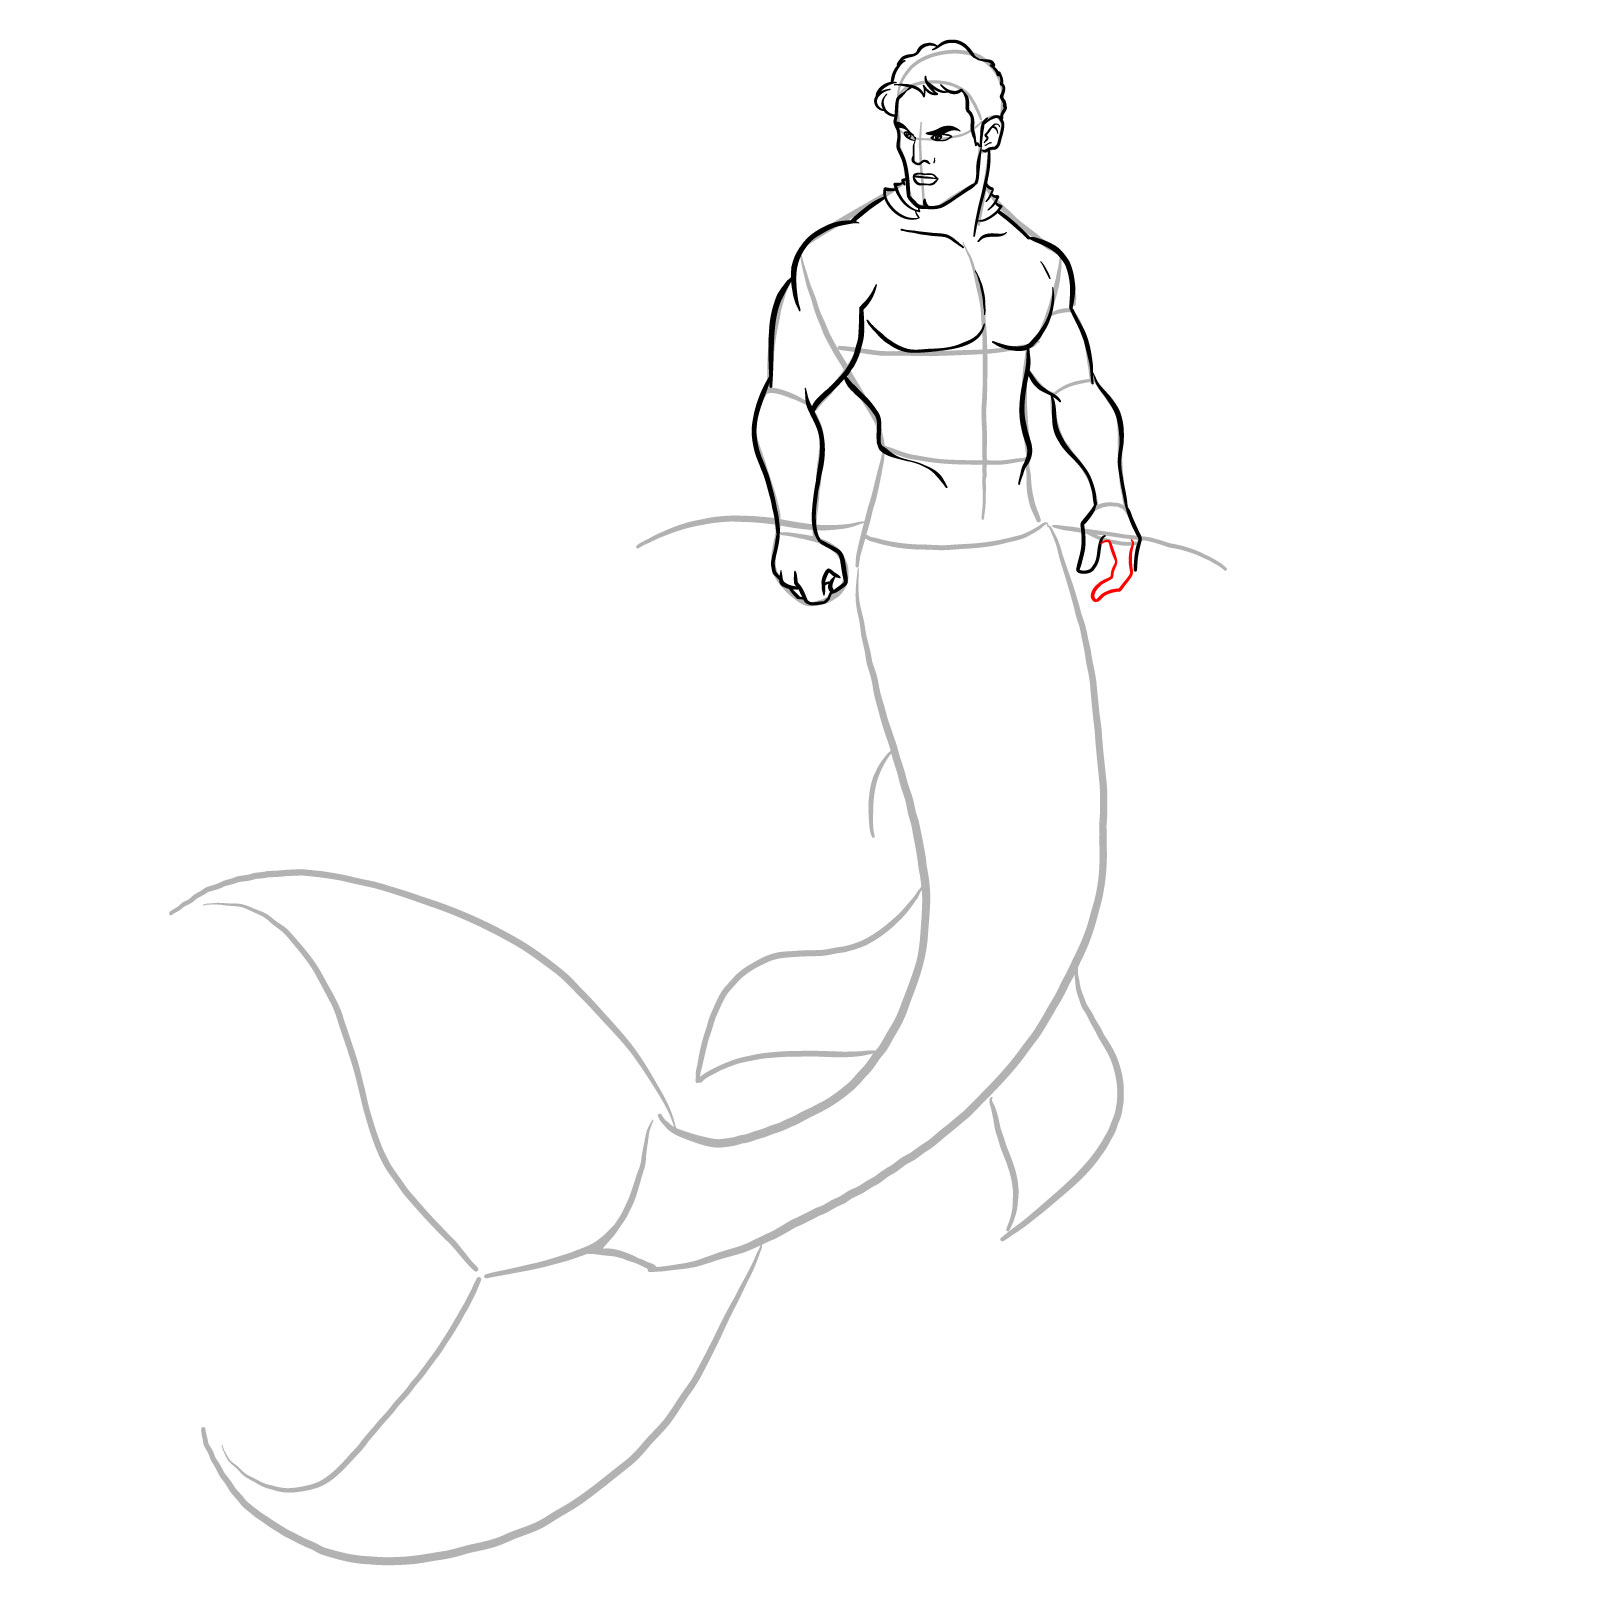 How to draw a Merman - step 21